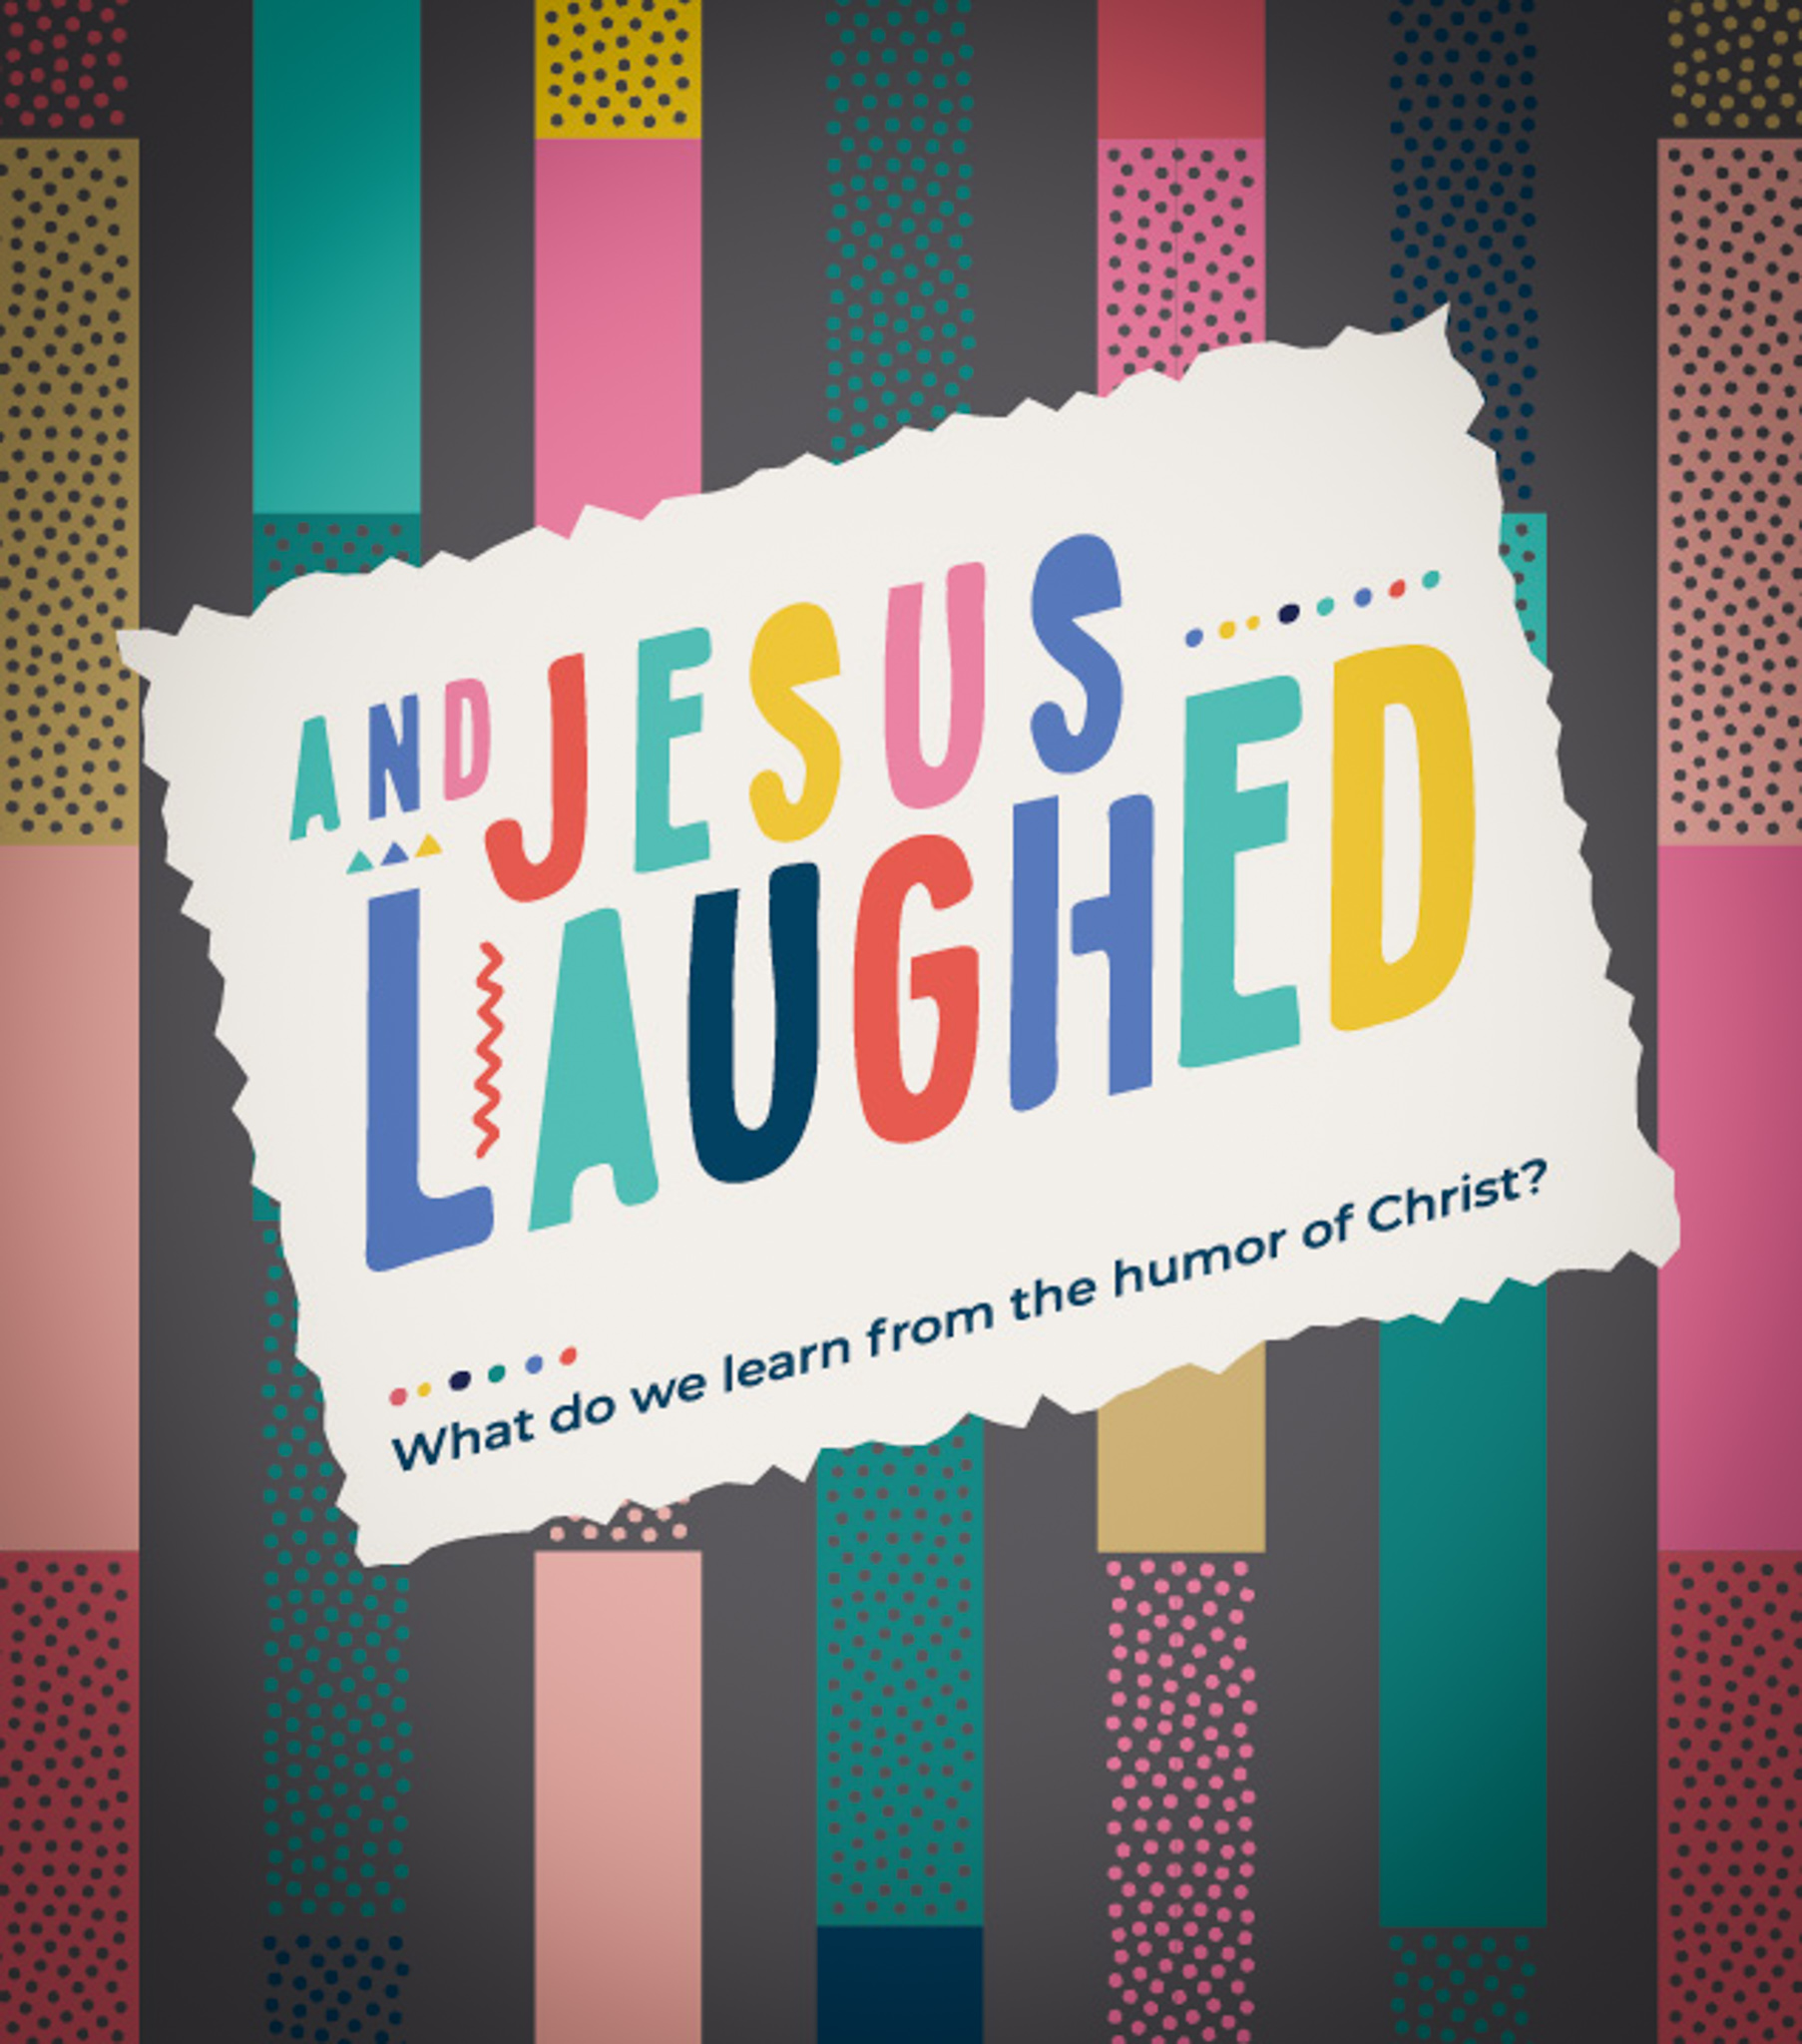 And Jesus Laughed: What Do We Learn from the Humor of Christ?
July 17
9:00 & 10:45 a.m. | Oak Brook
10:00 a.m. | Butterfield
